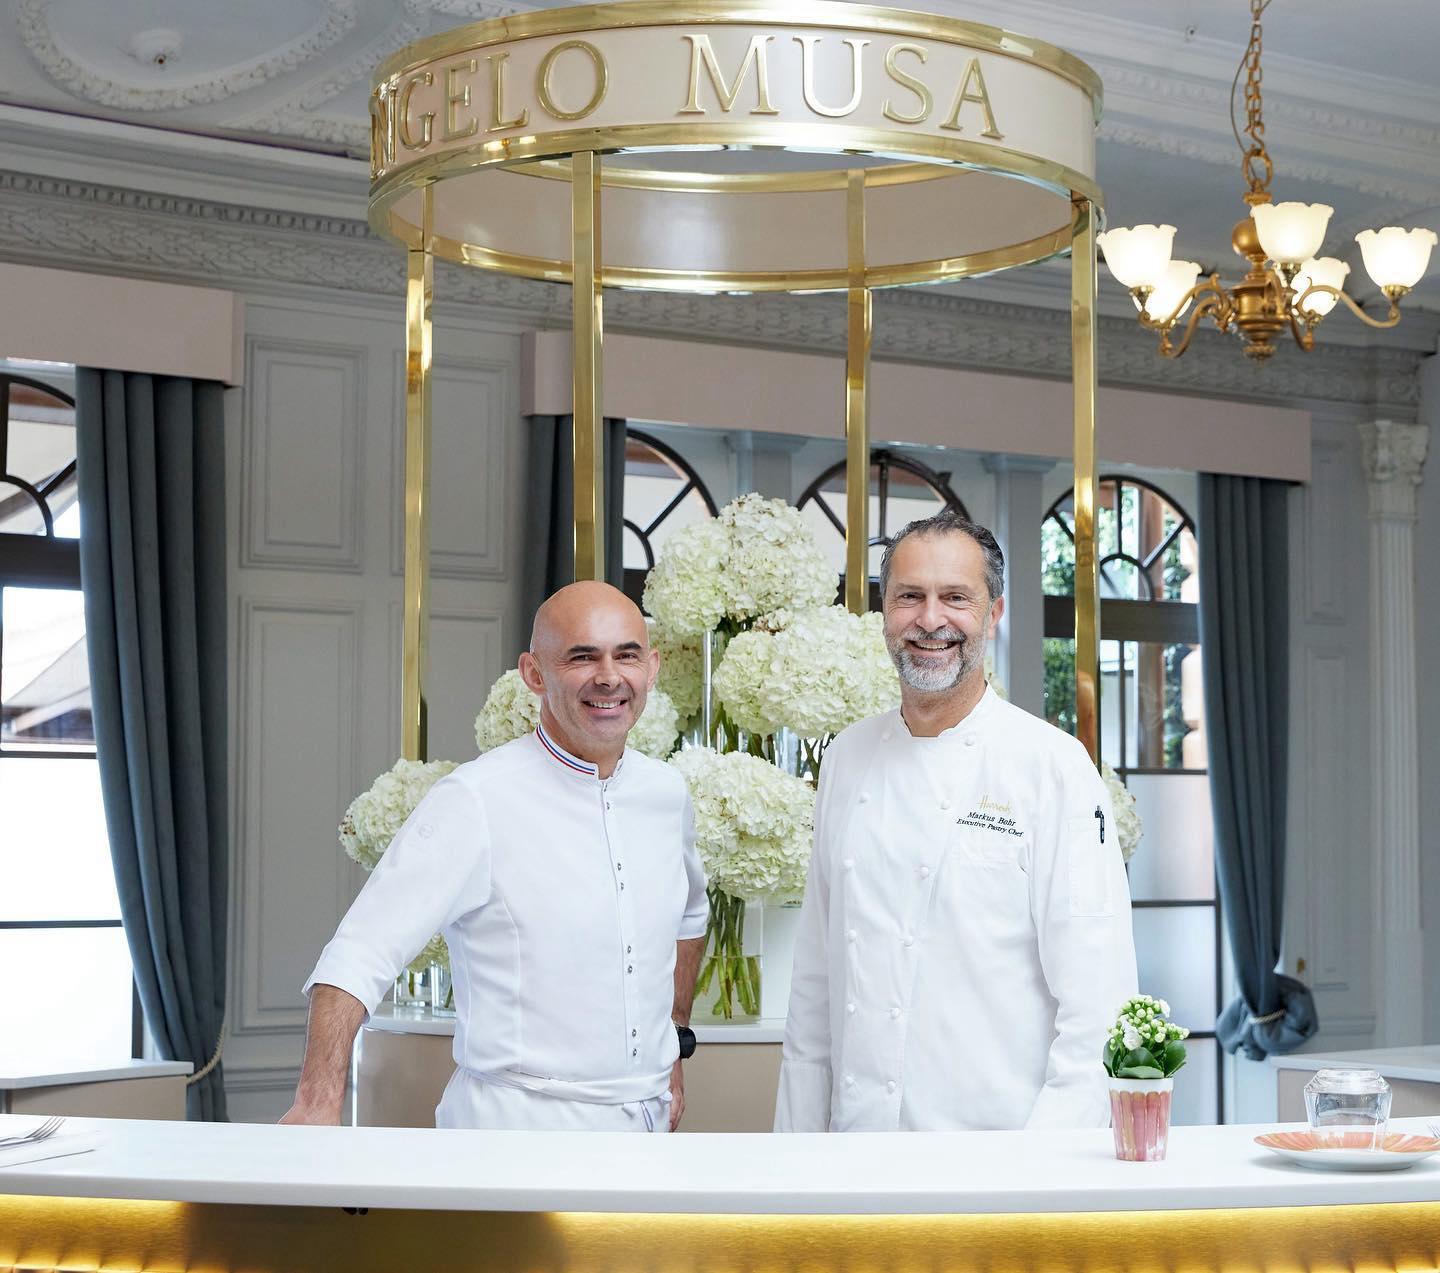 image  1 Angelo Musa - #chefmarkusbohr and I wish you all a warm welcome to my new address